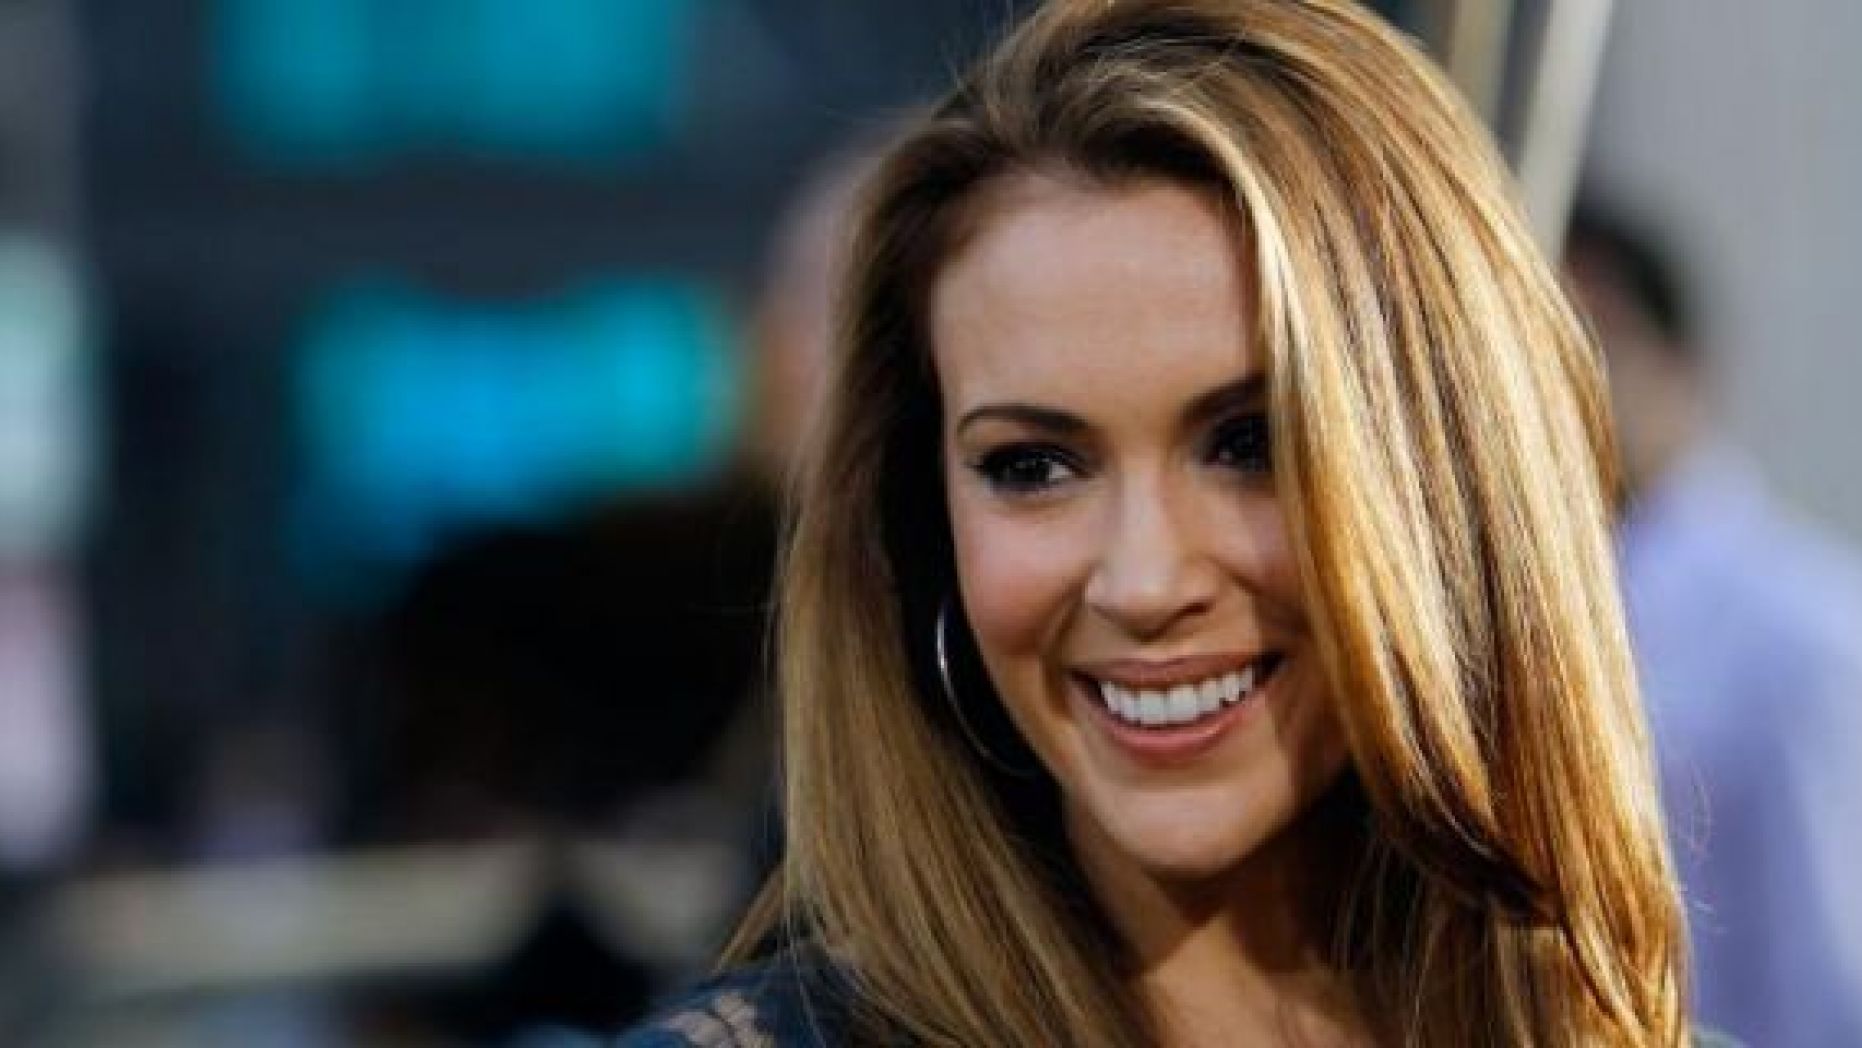 Actress Alyssa Milano took Twitter heat from the father of a Parkland school shooting victim.